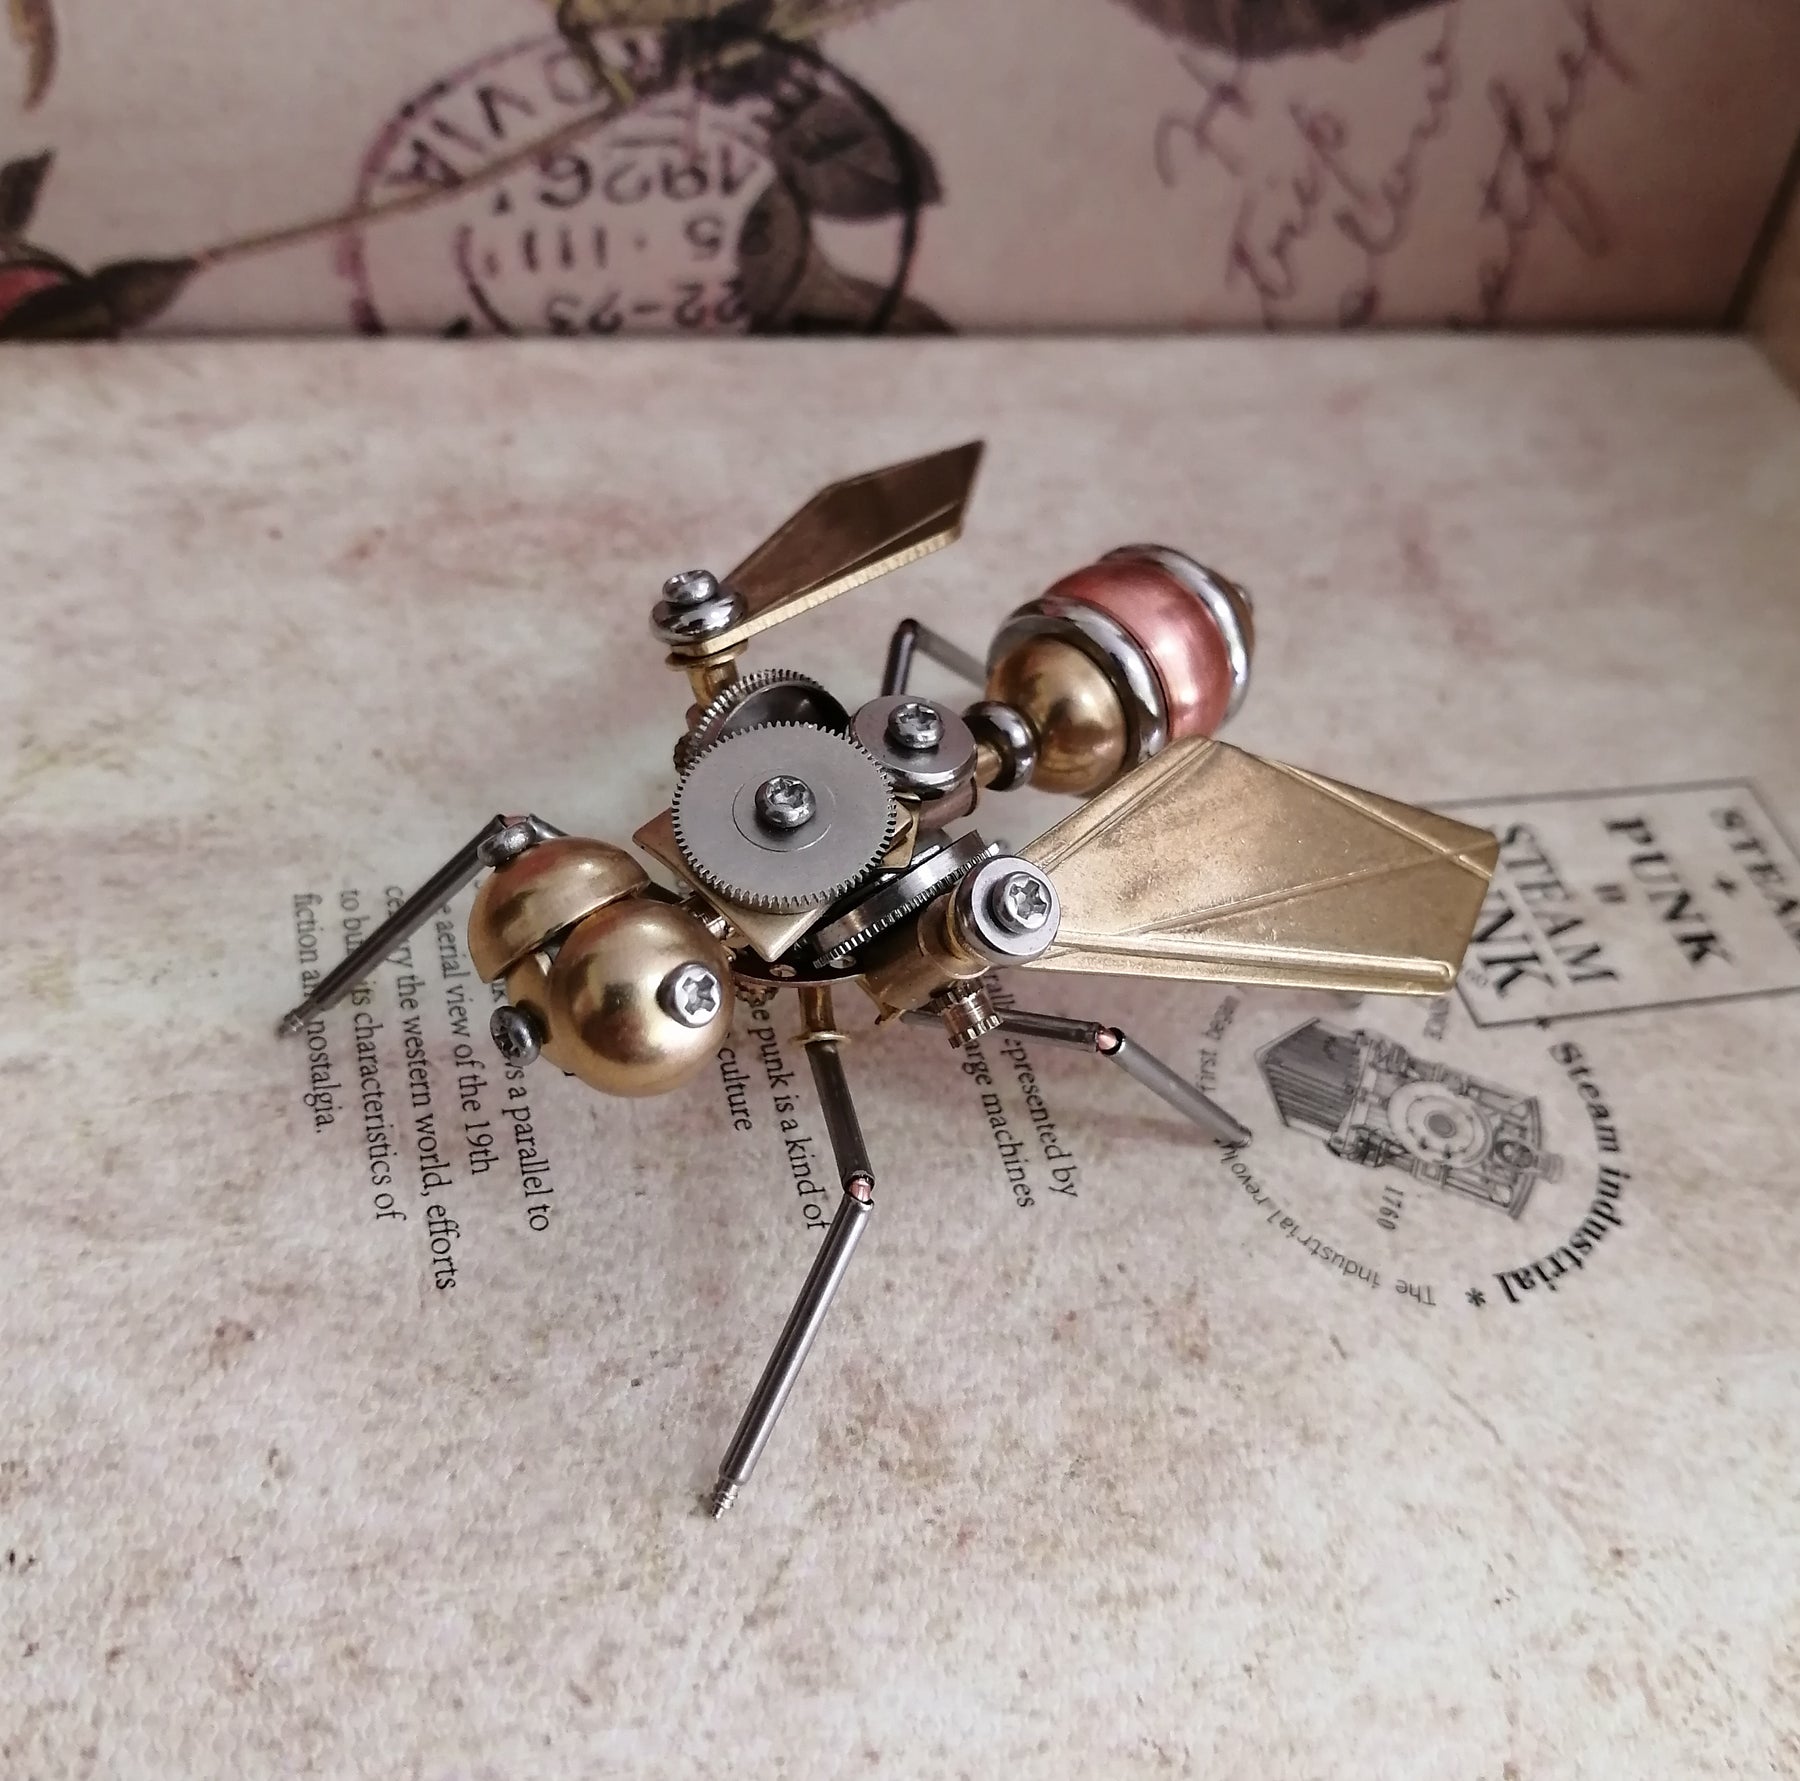 A Maramalive™ steampunk metal fly crafts sitting on top of a book.